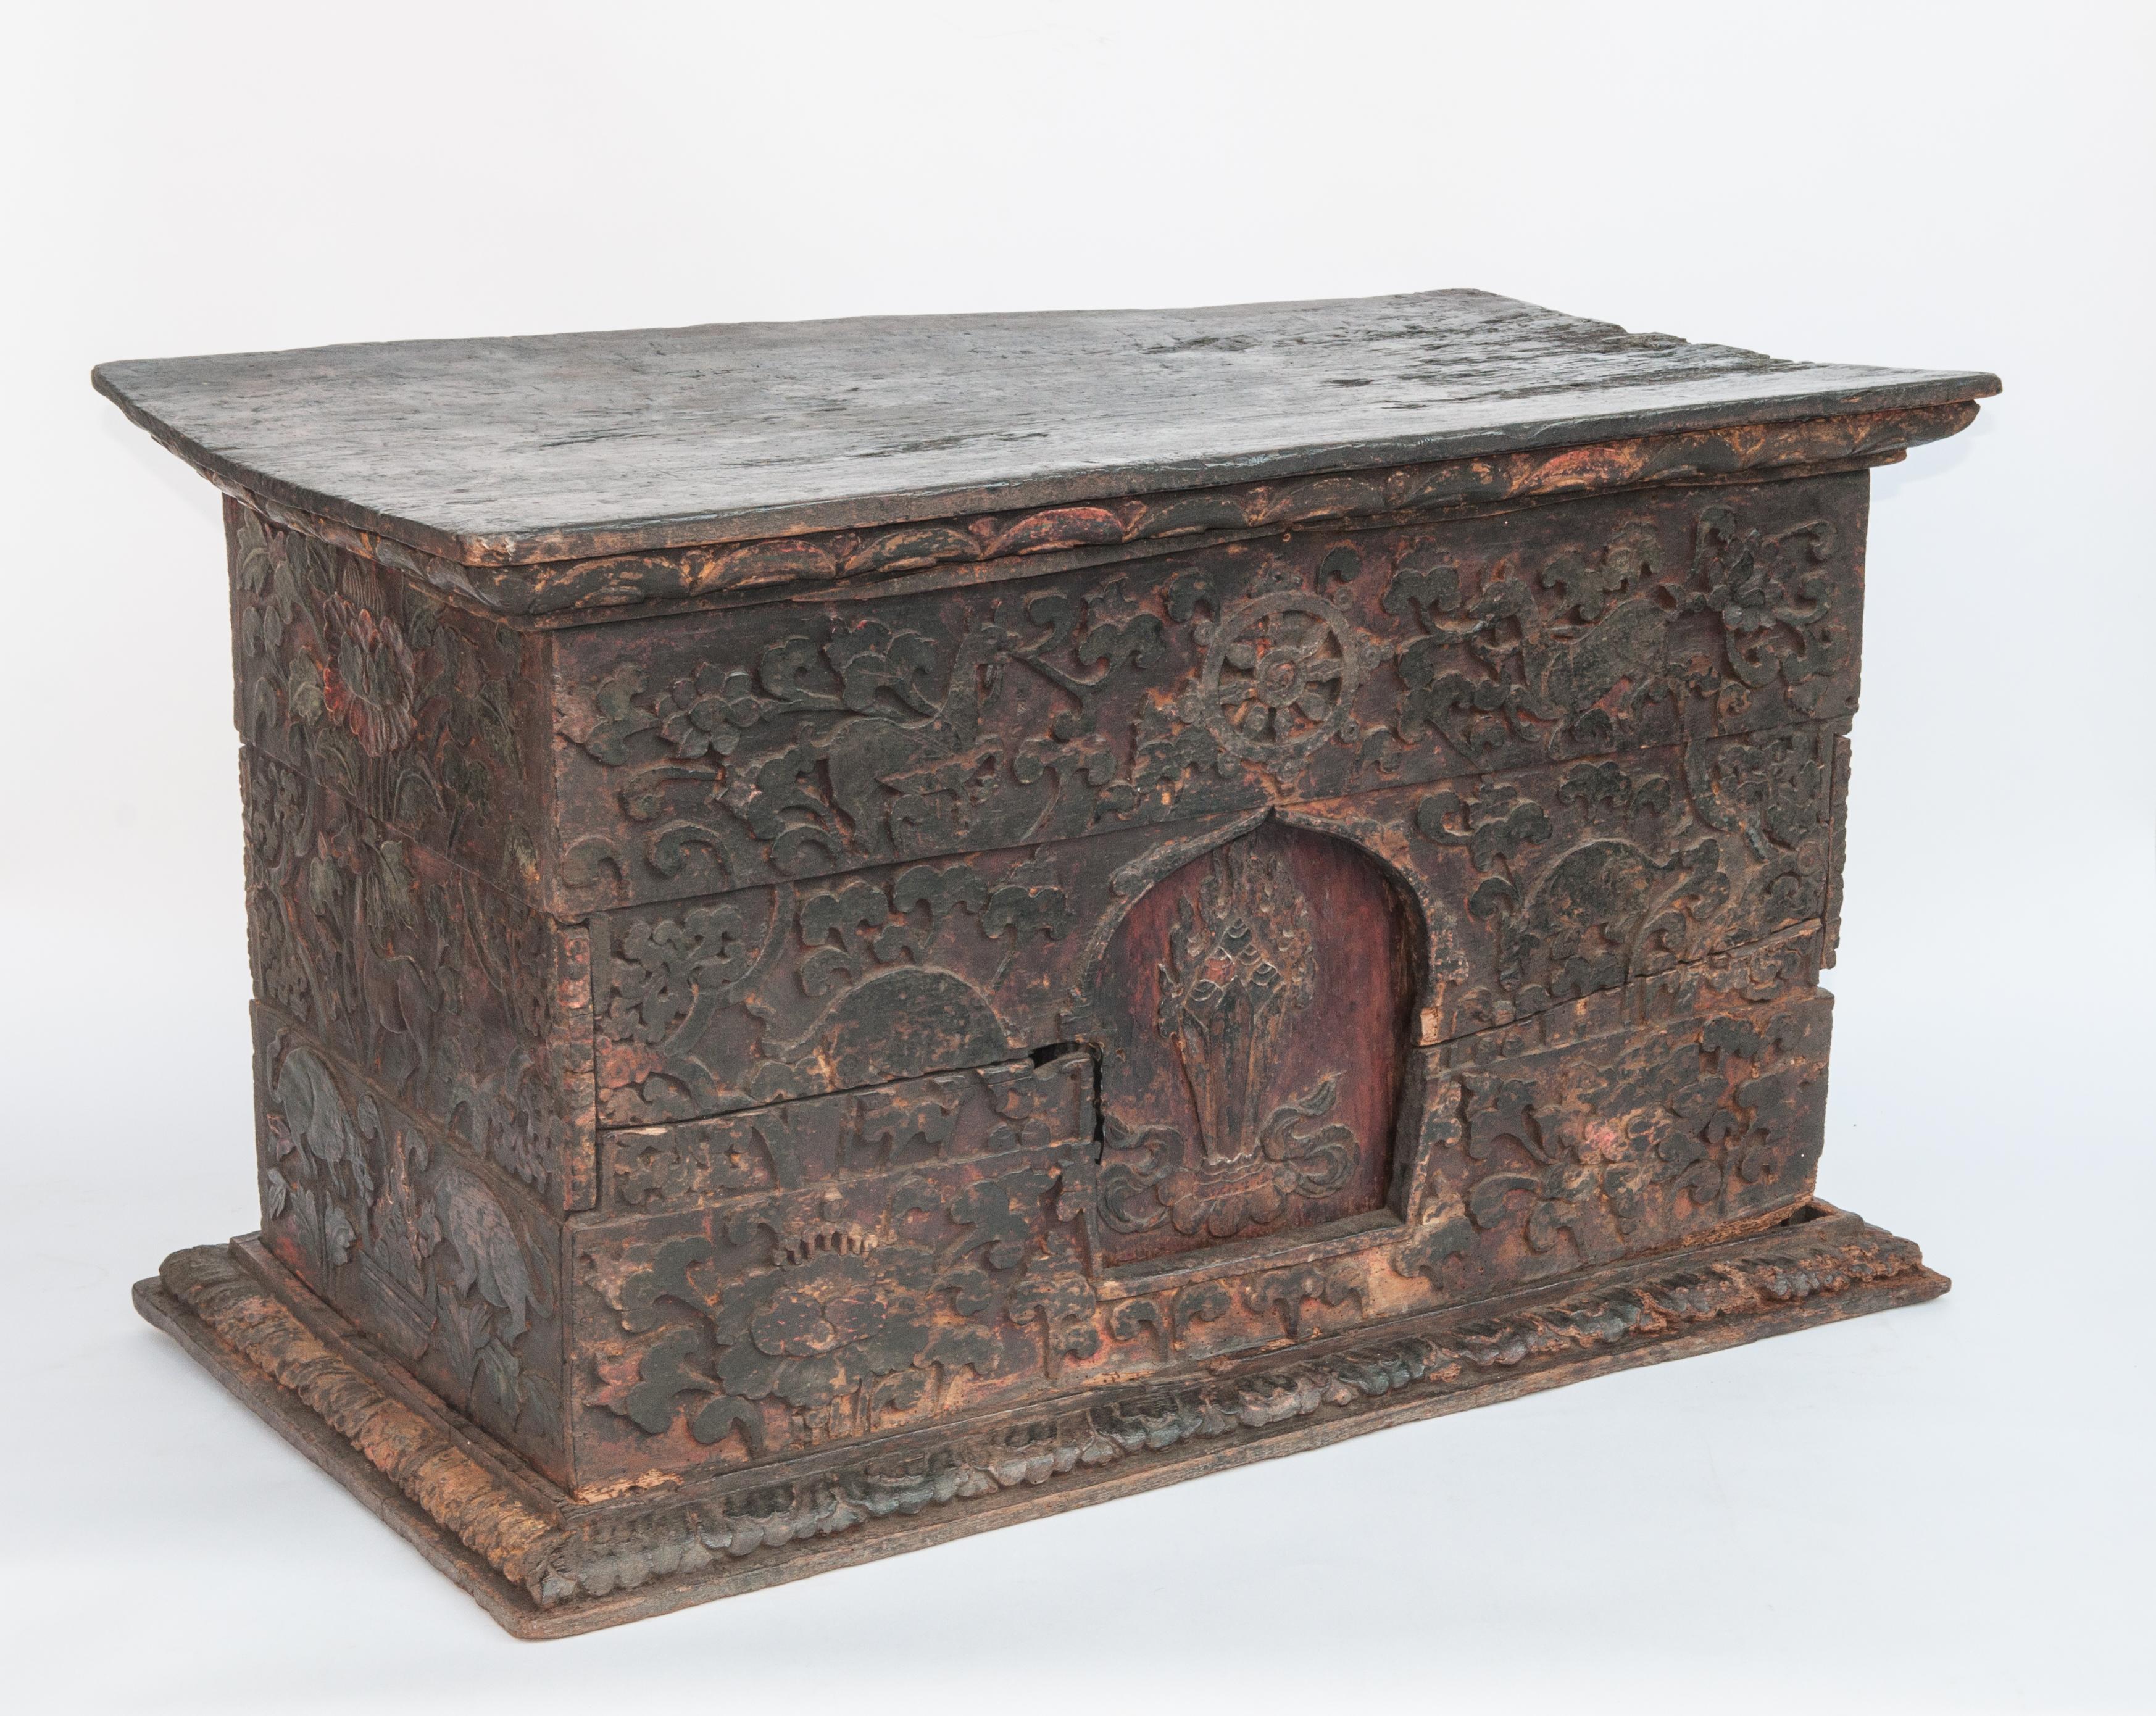 Hand-Crafted Antique Tibetan Style Religious Storage Box from Bhutan, 19th Century or Earlier